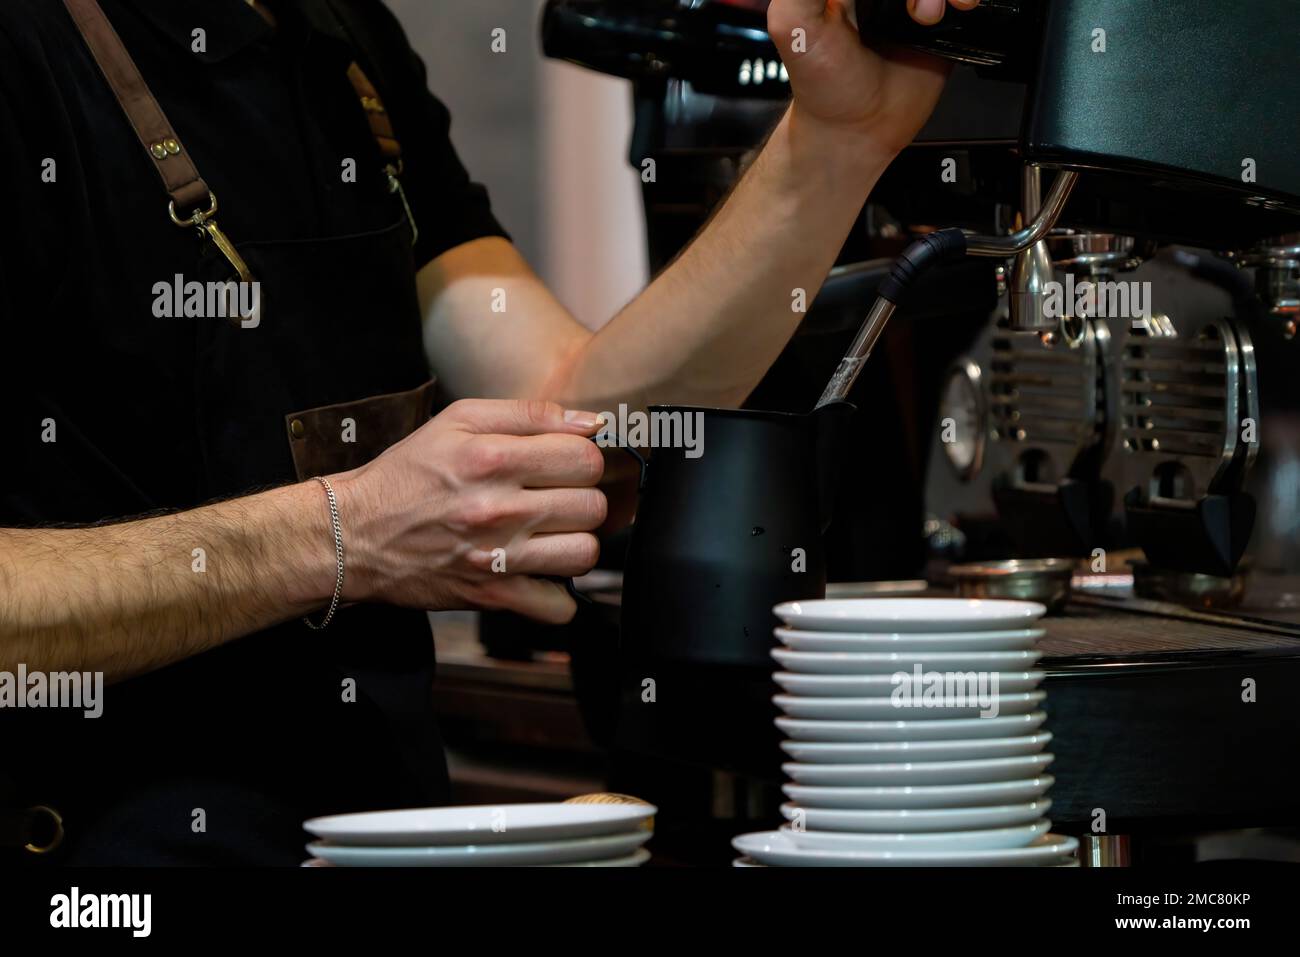 Barista frothing milk to make coffee. Barista hands in front of coffee machine Stock Photo